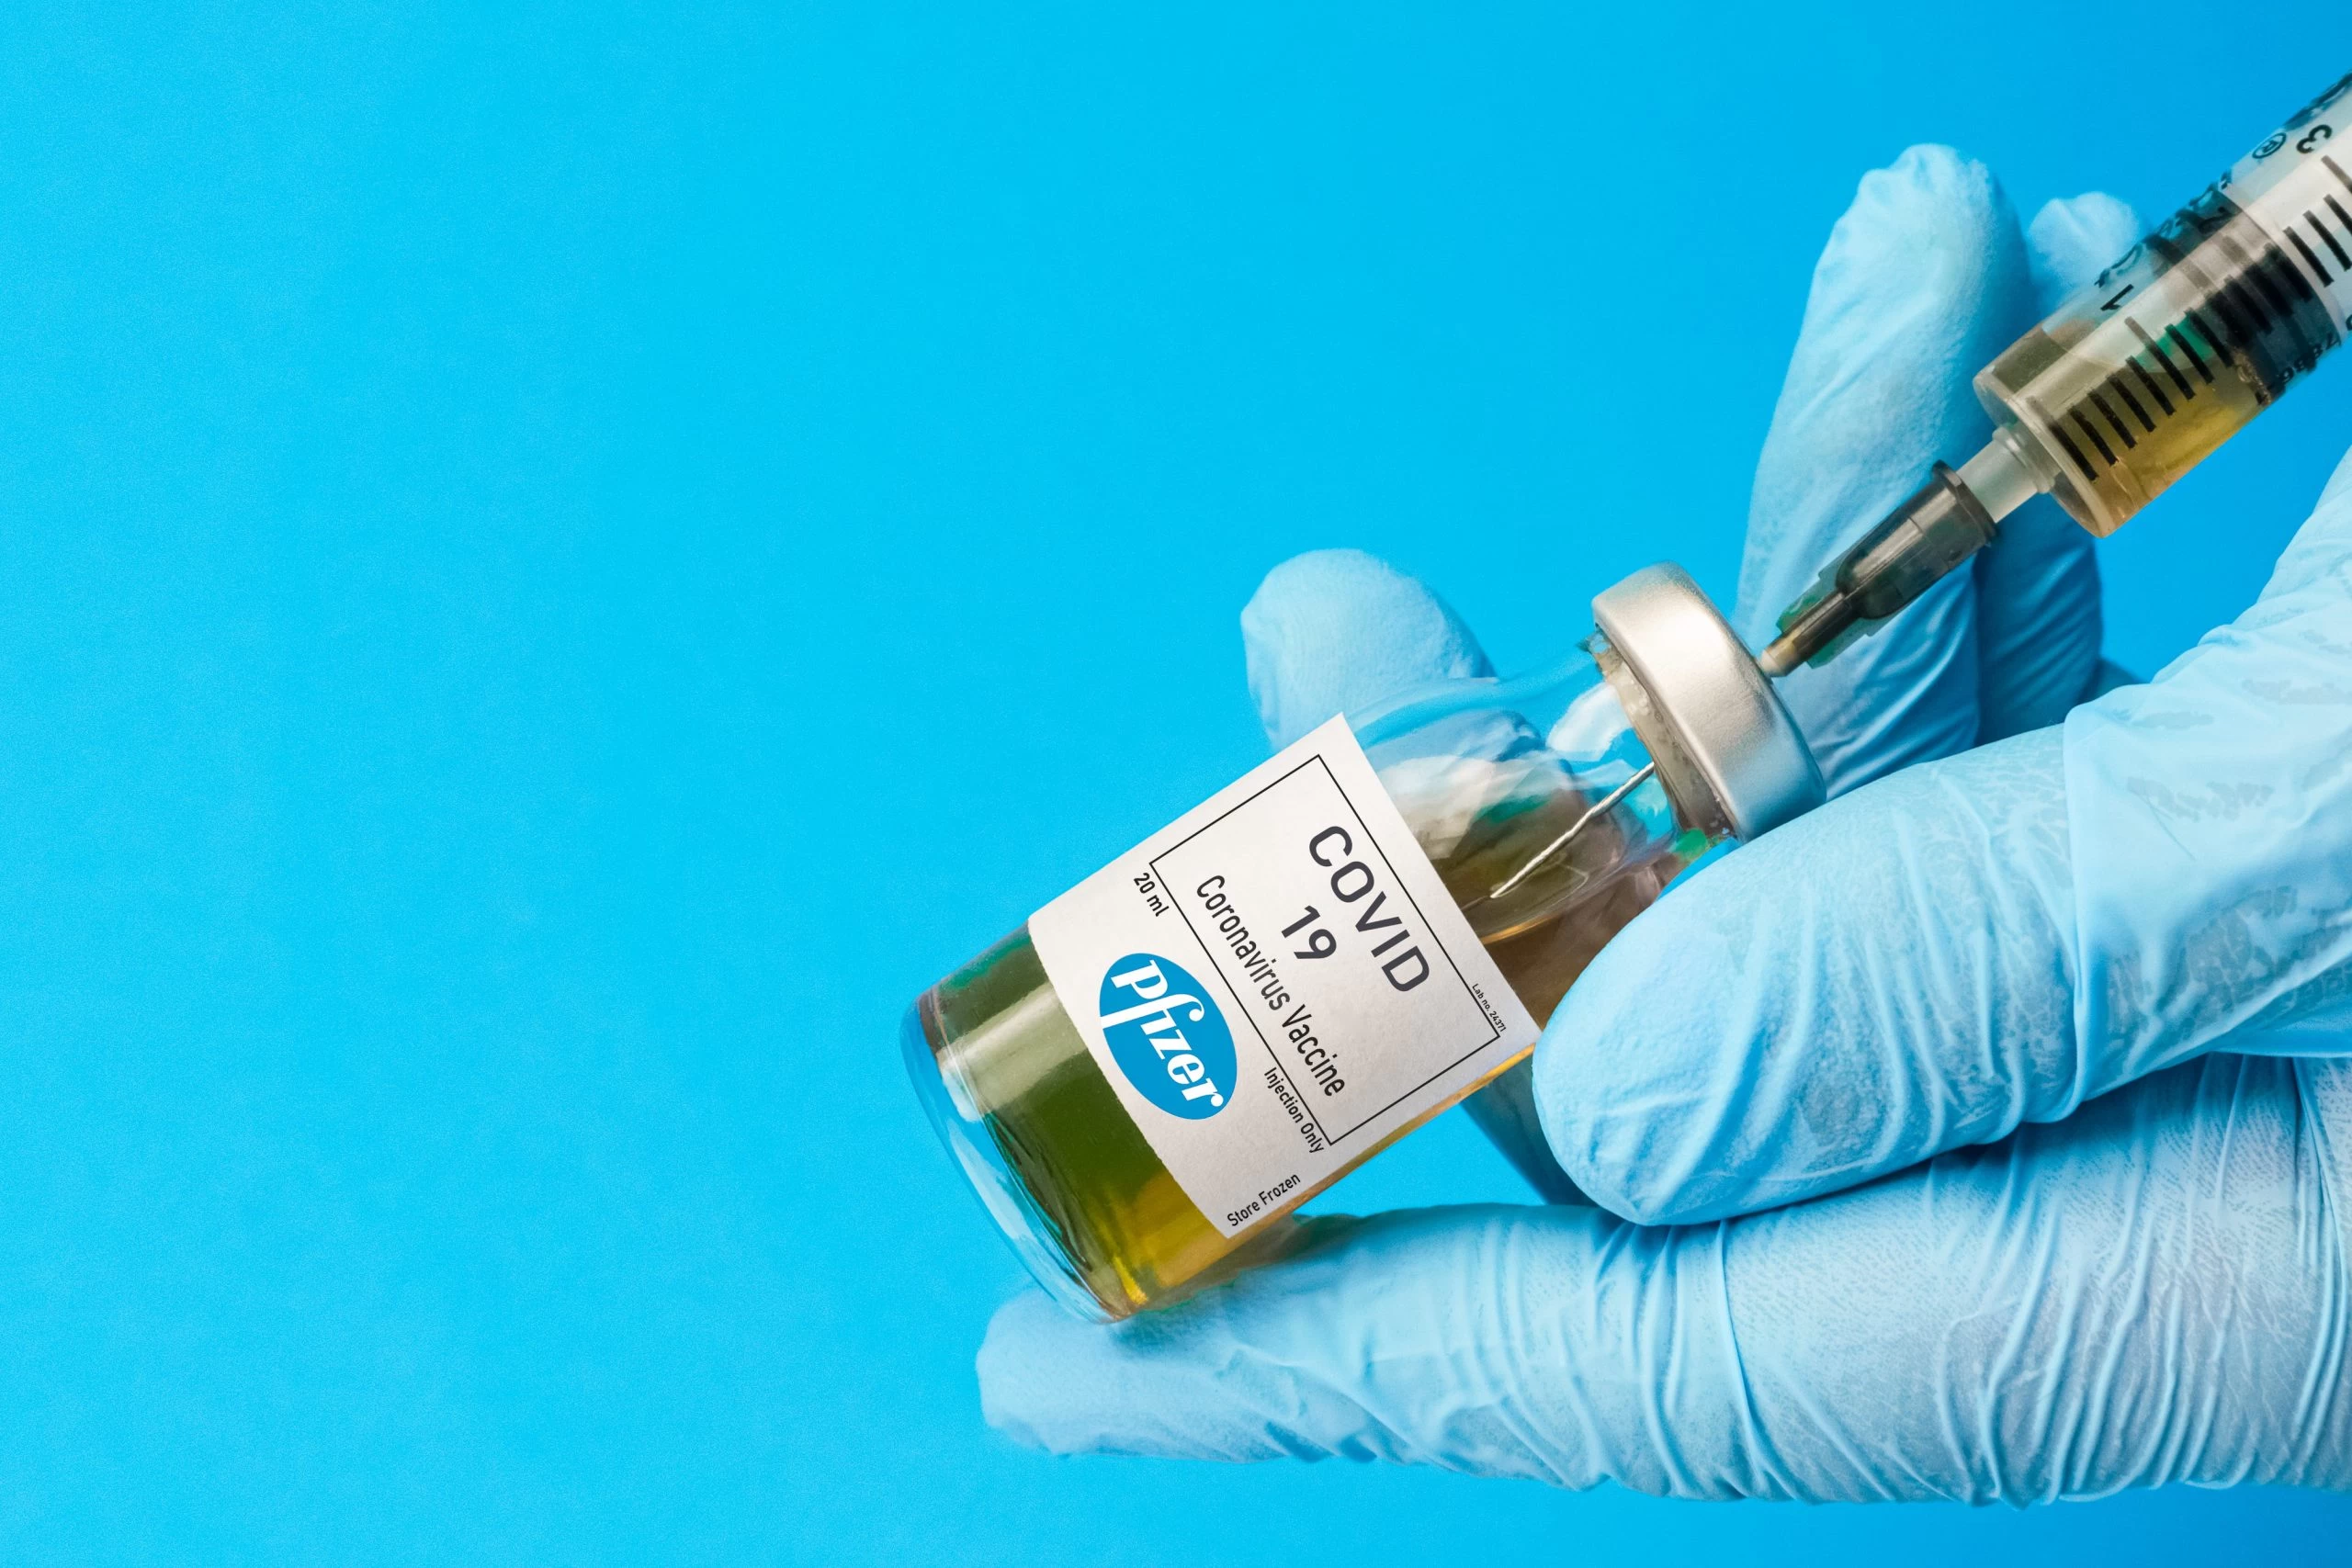 Pfizer Covid-19 vaccine can now be stored at fridge temperature for longer